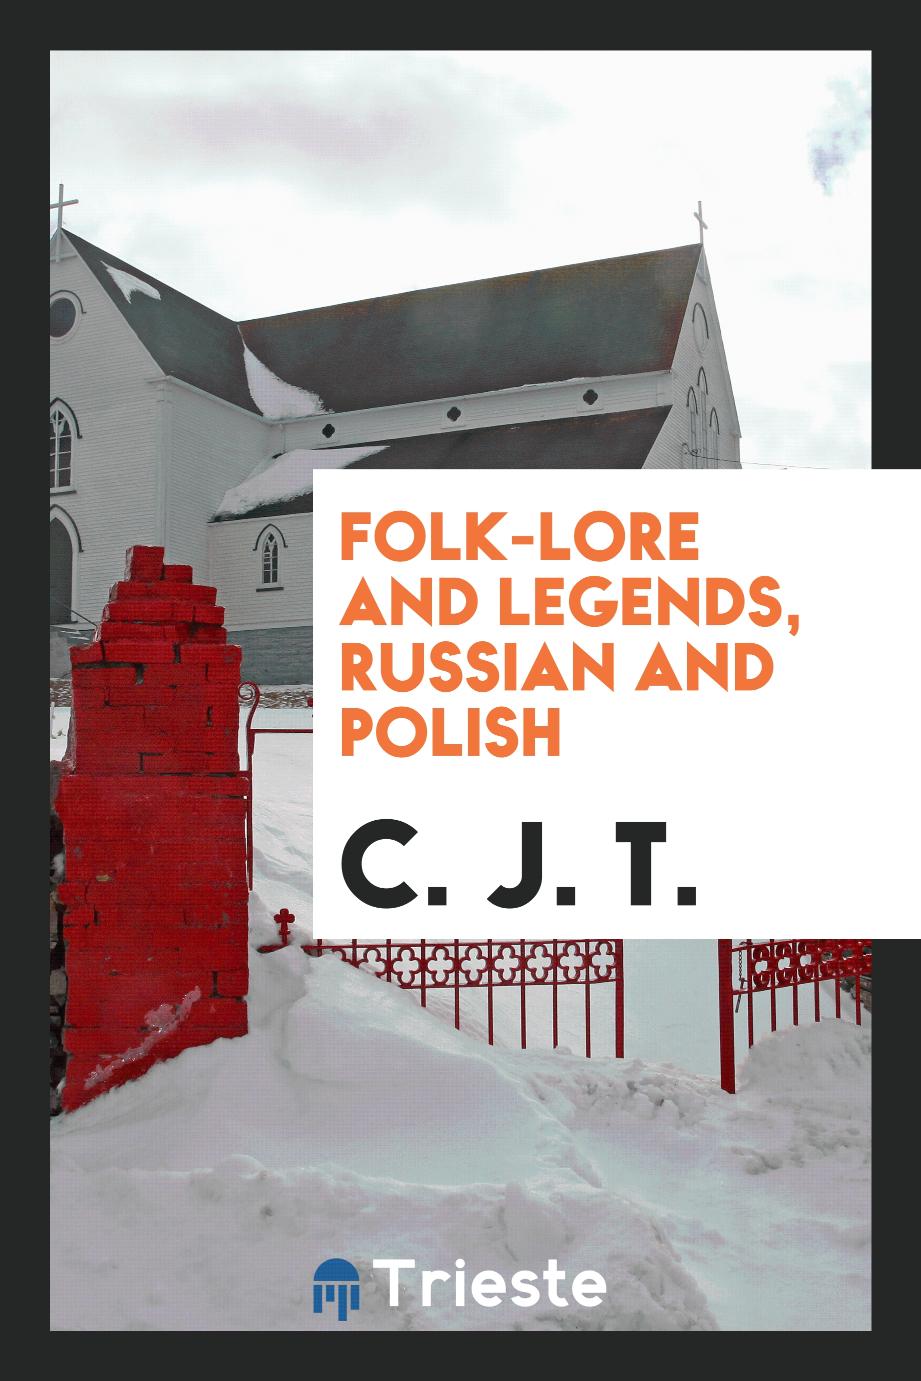 Folk-lore and legends, Russian and Polish